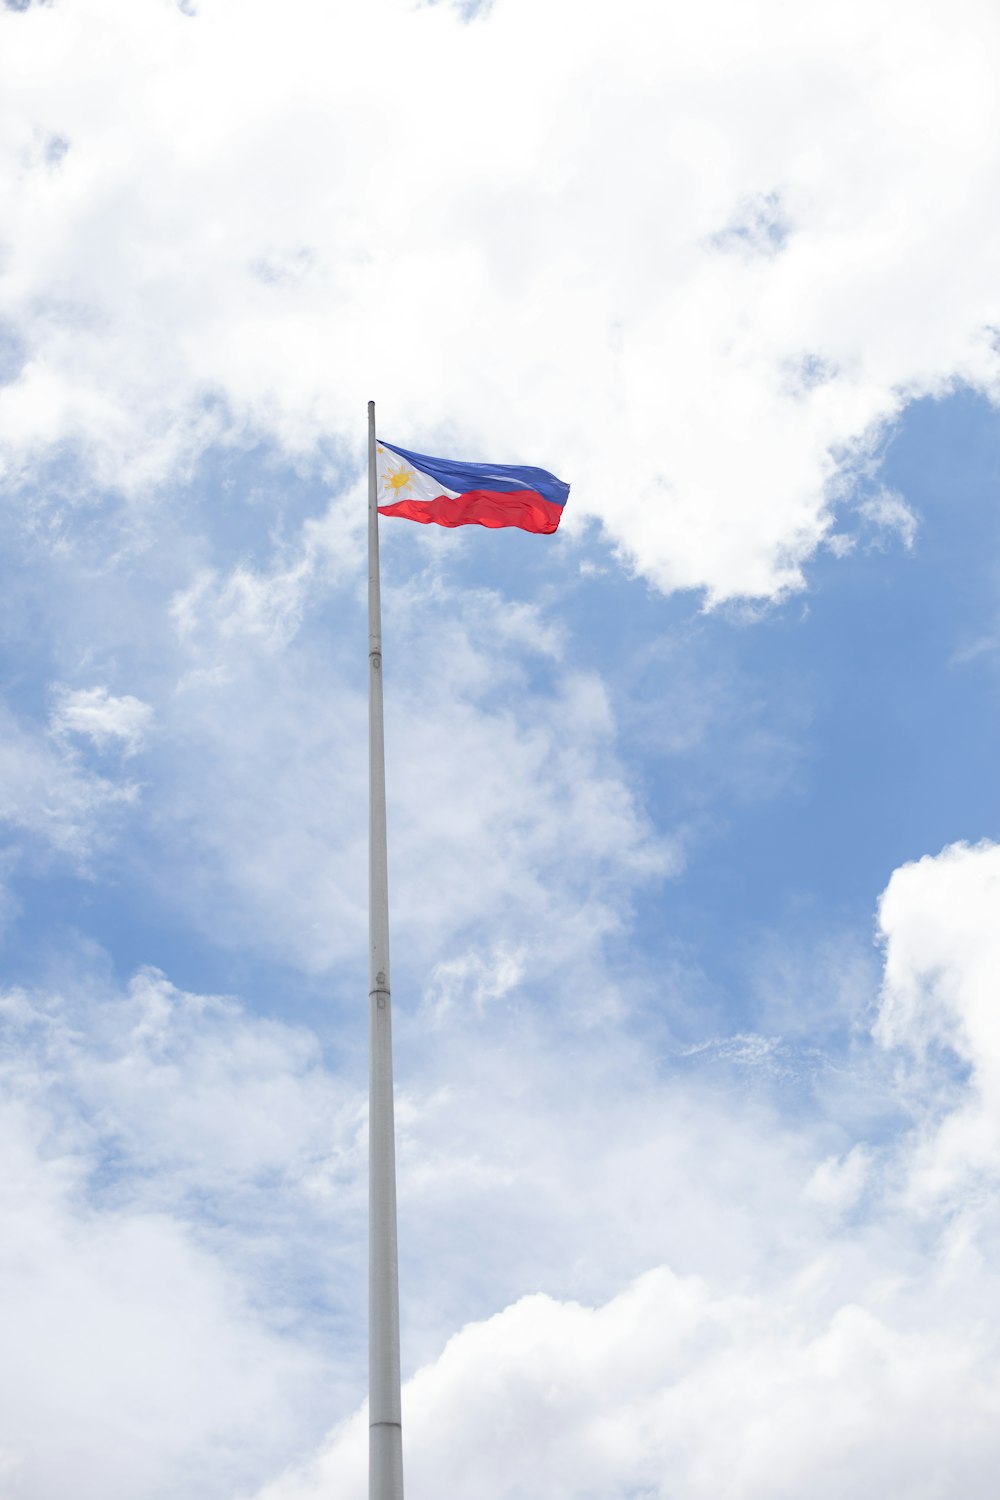 Philippine Flag Pictures Download Free Images On Unsplash